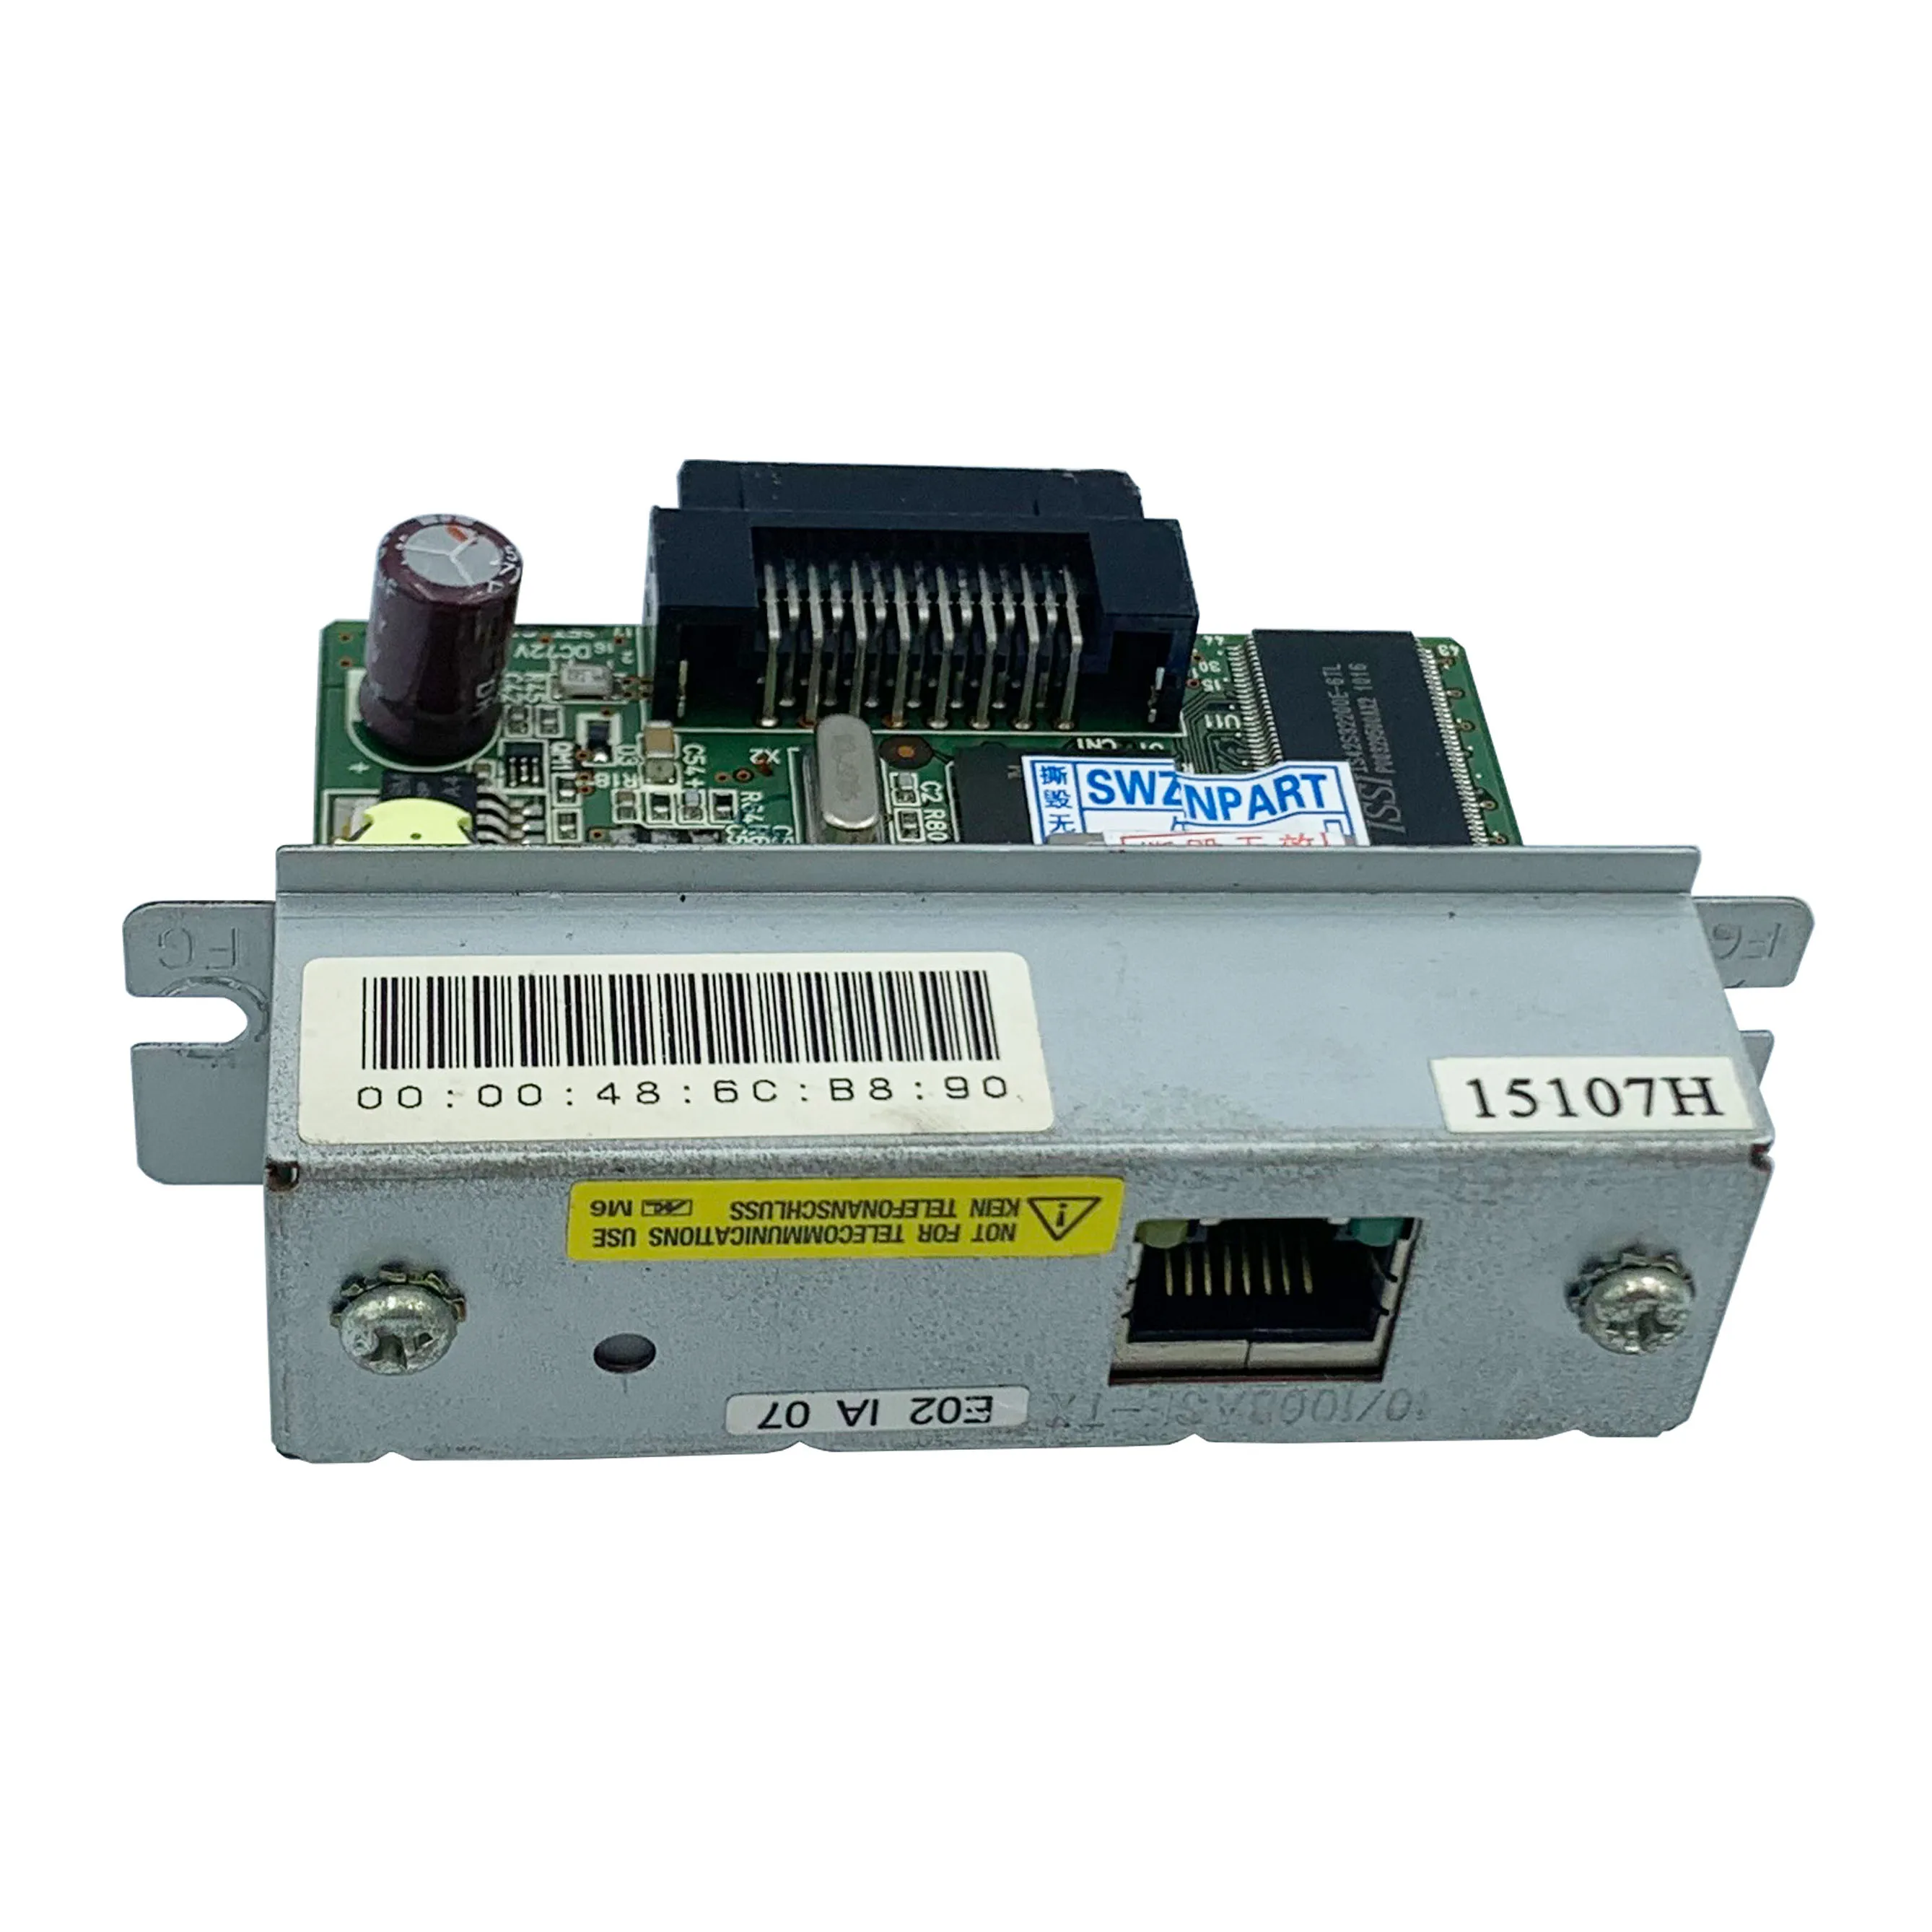 Replacement Parts for Printer PRTA08795 Serial Interface TM-T88V T86L TM90TM-U220PA TM-Uce Card for Eps TMTIN-TMTE P88210TBM081 T88III TM-U220PD TM-U22T288R-T-U Printer